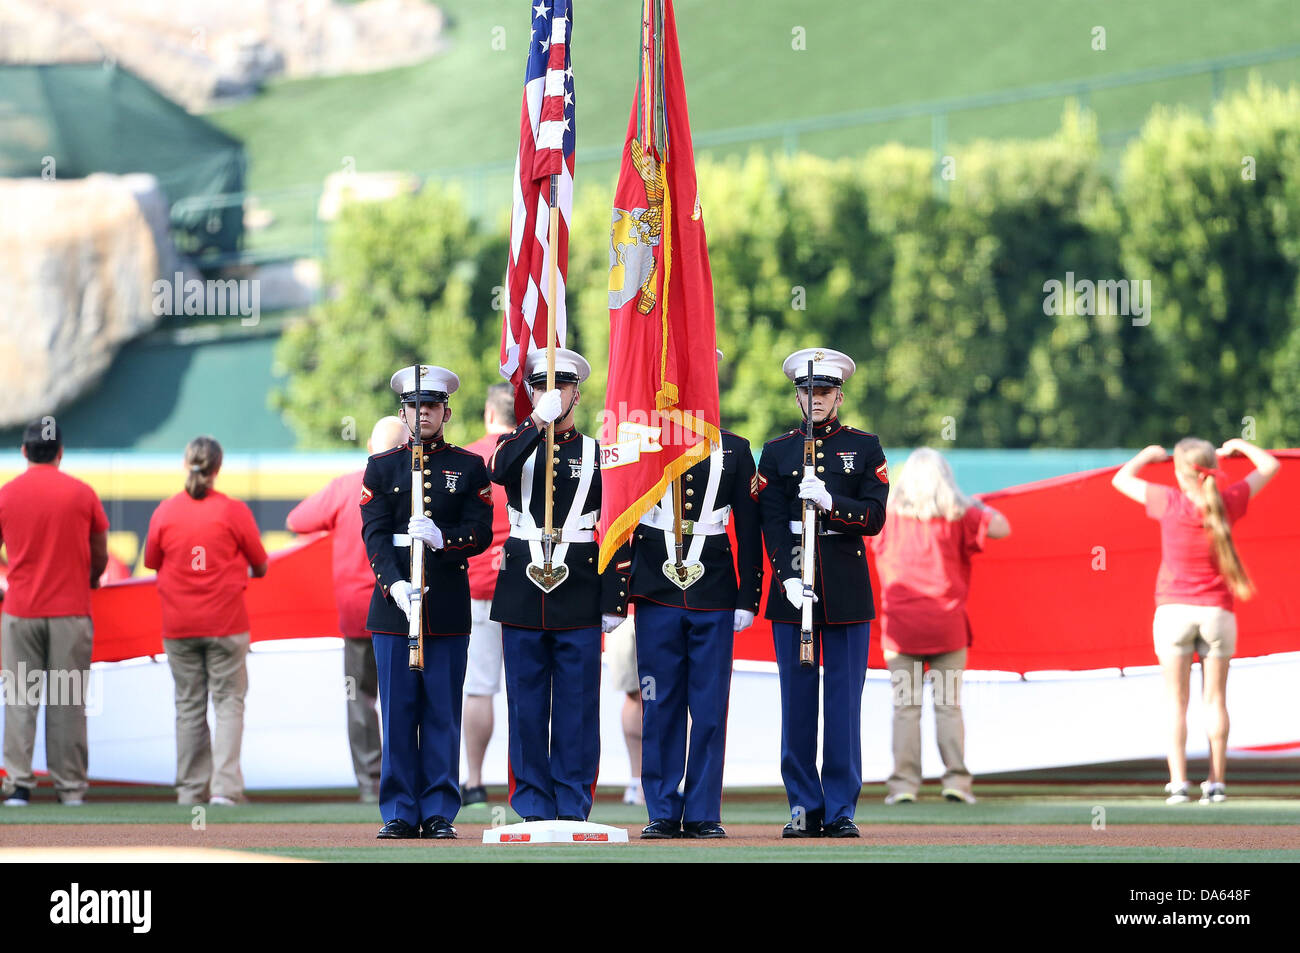 Anaheim, California, USA. 4th July, 2013. July 4, 2013 Anaheim, California: United States Marine Corps color guard before the Major League Baseball game between the St. Louis Cardinals and the Los Angeles Angels at Angel Stadium on July 4, 2013 in Anaheim, California. Rob Carmell/CSM/Alamy Live News Stock Photo